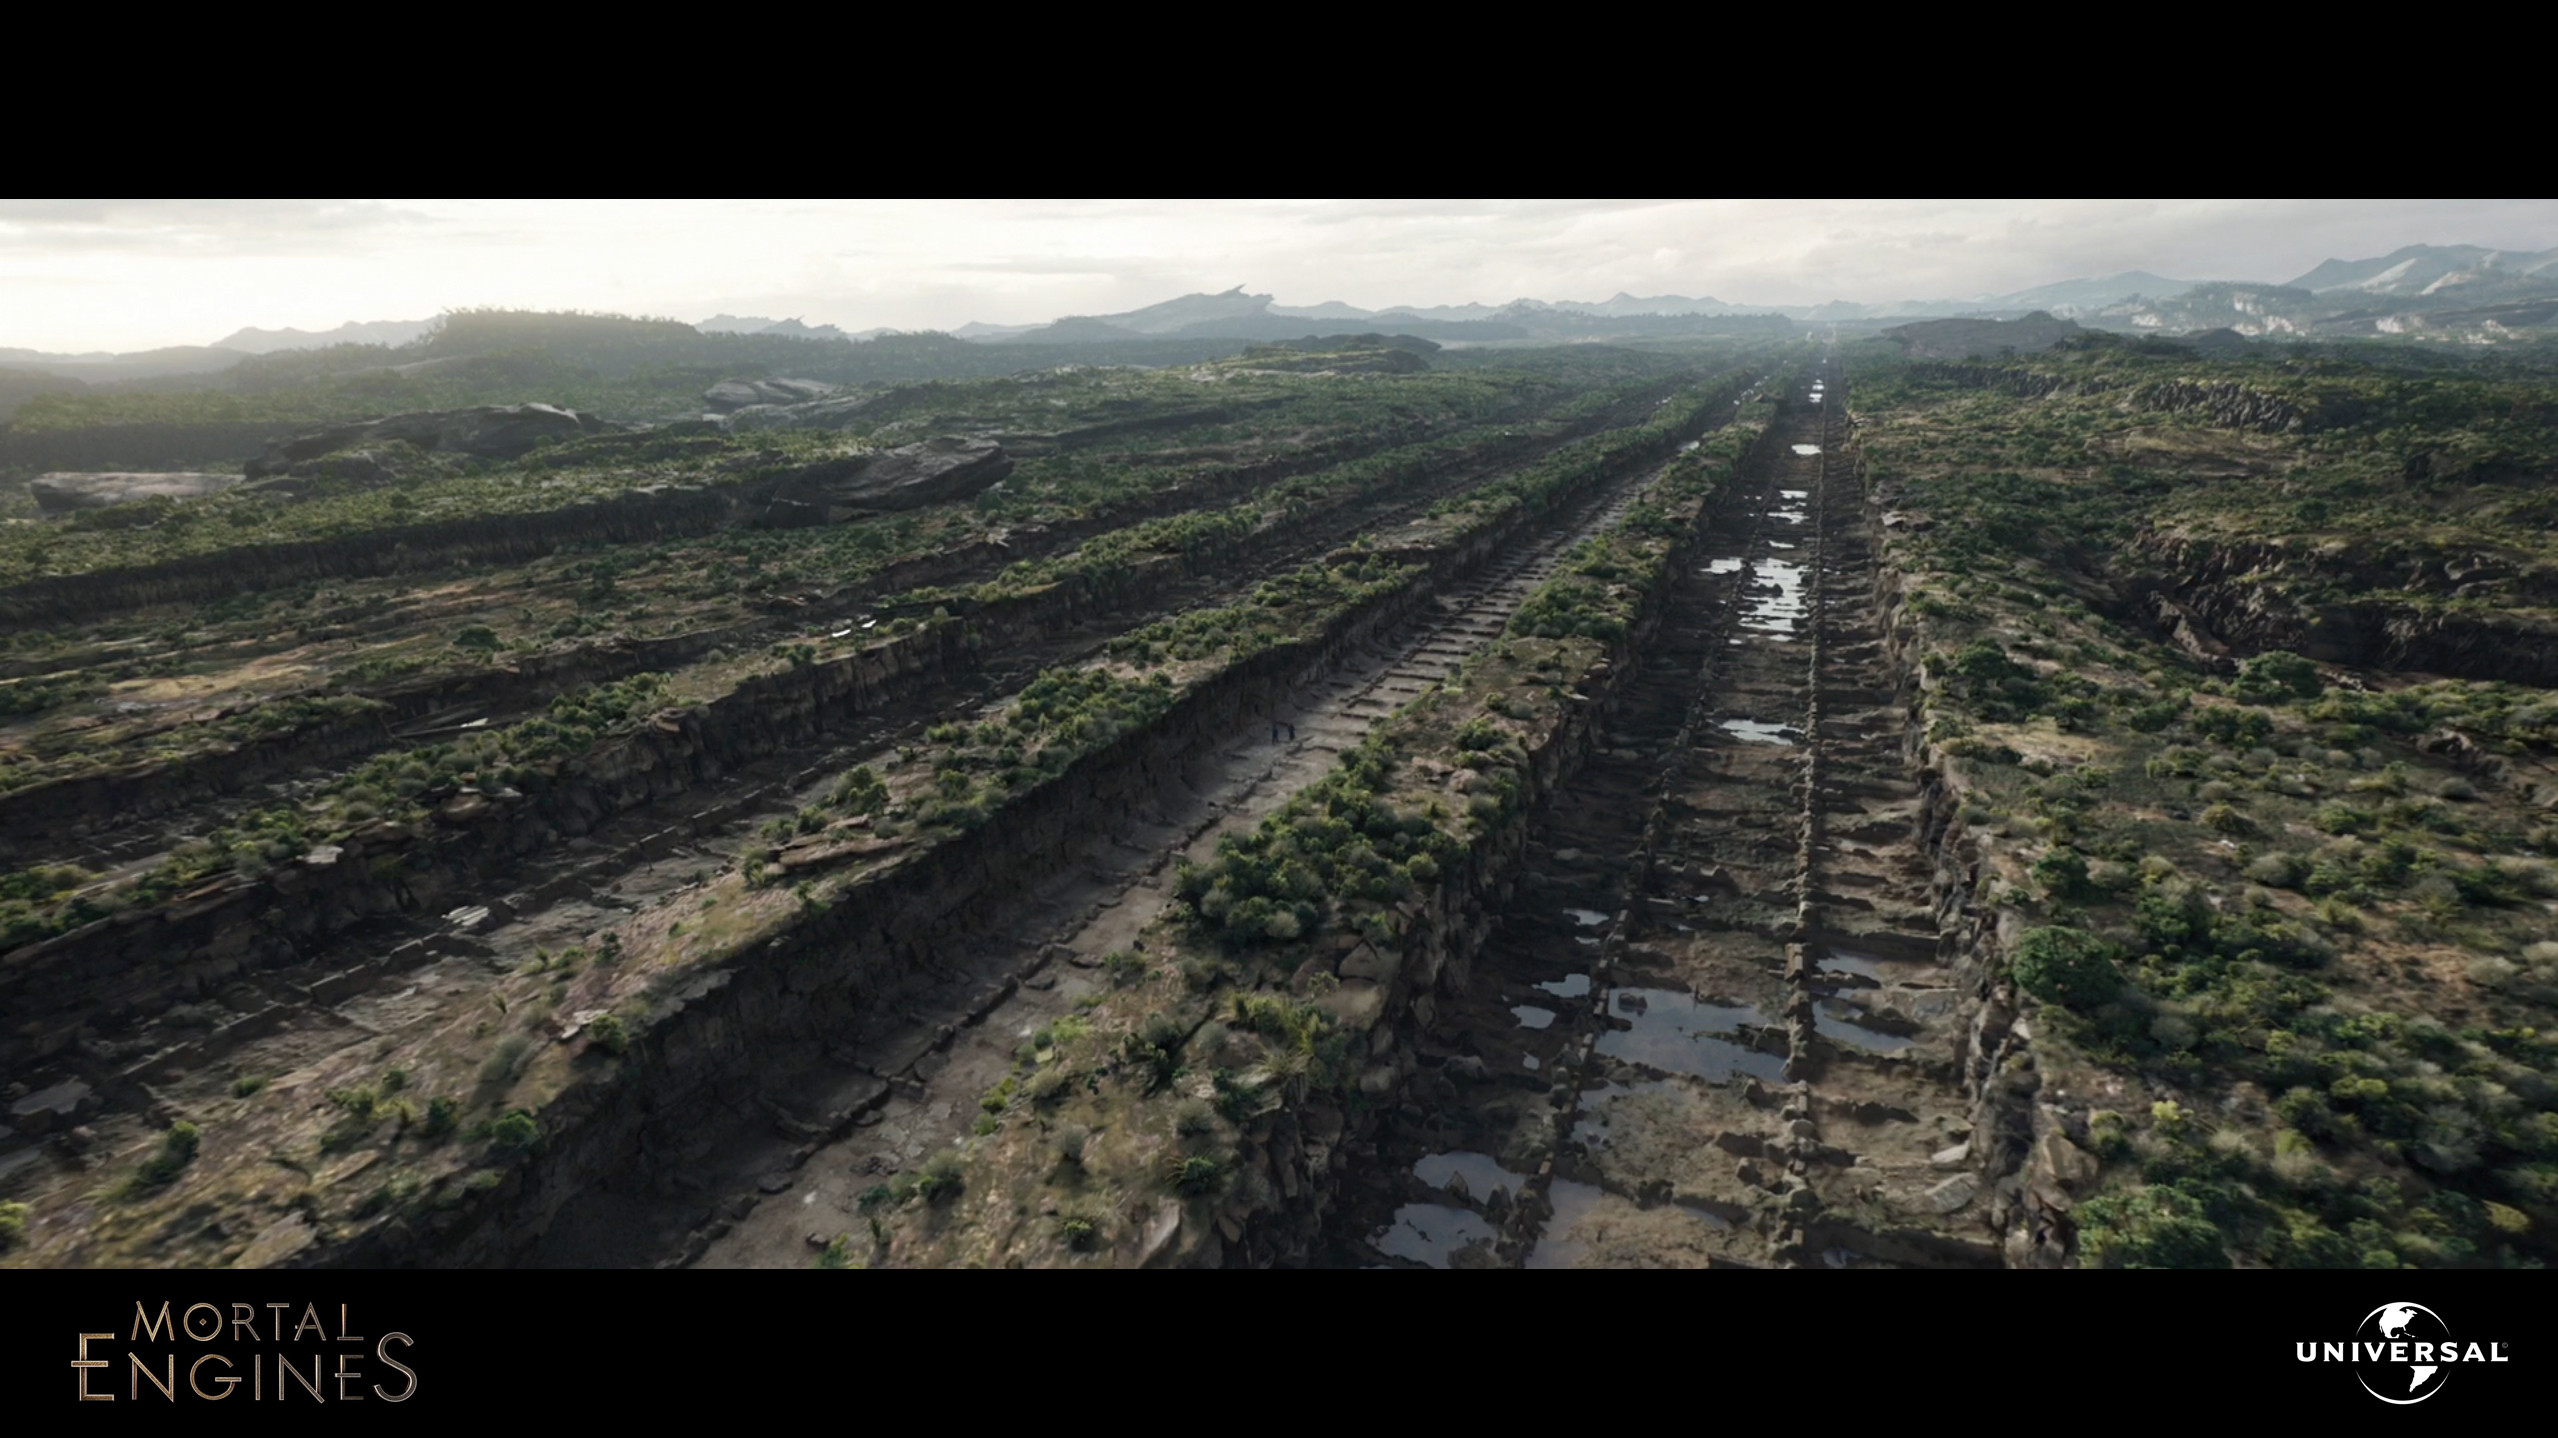 3D Environment establisher, hunting grounds trench left by the city of London. Built with Maya, zBrush, Clarisse, PhotoShop and Nuke. Centre track was CG rendered character area from Lighting.